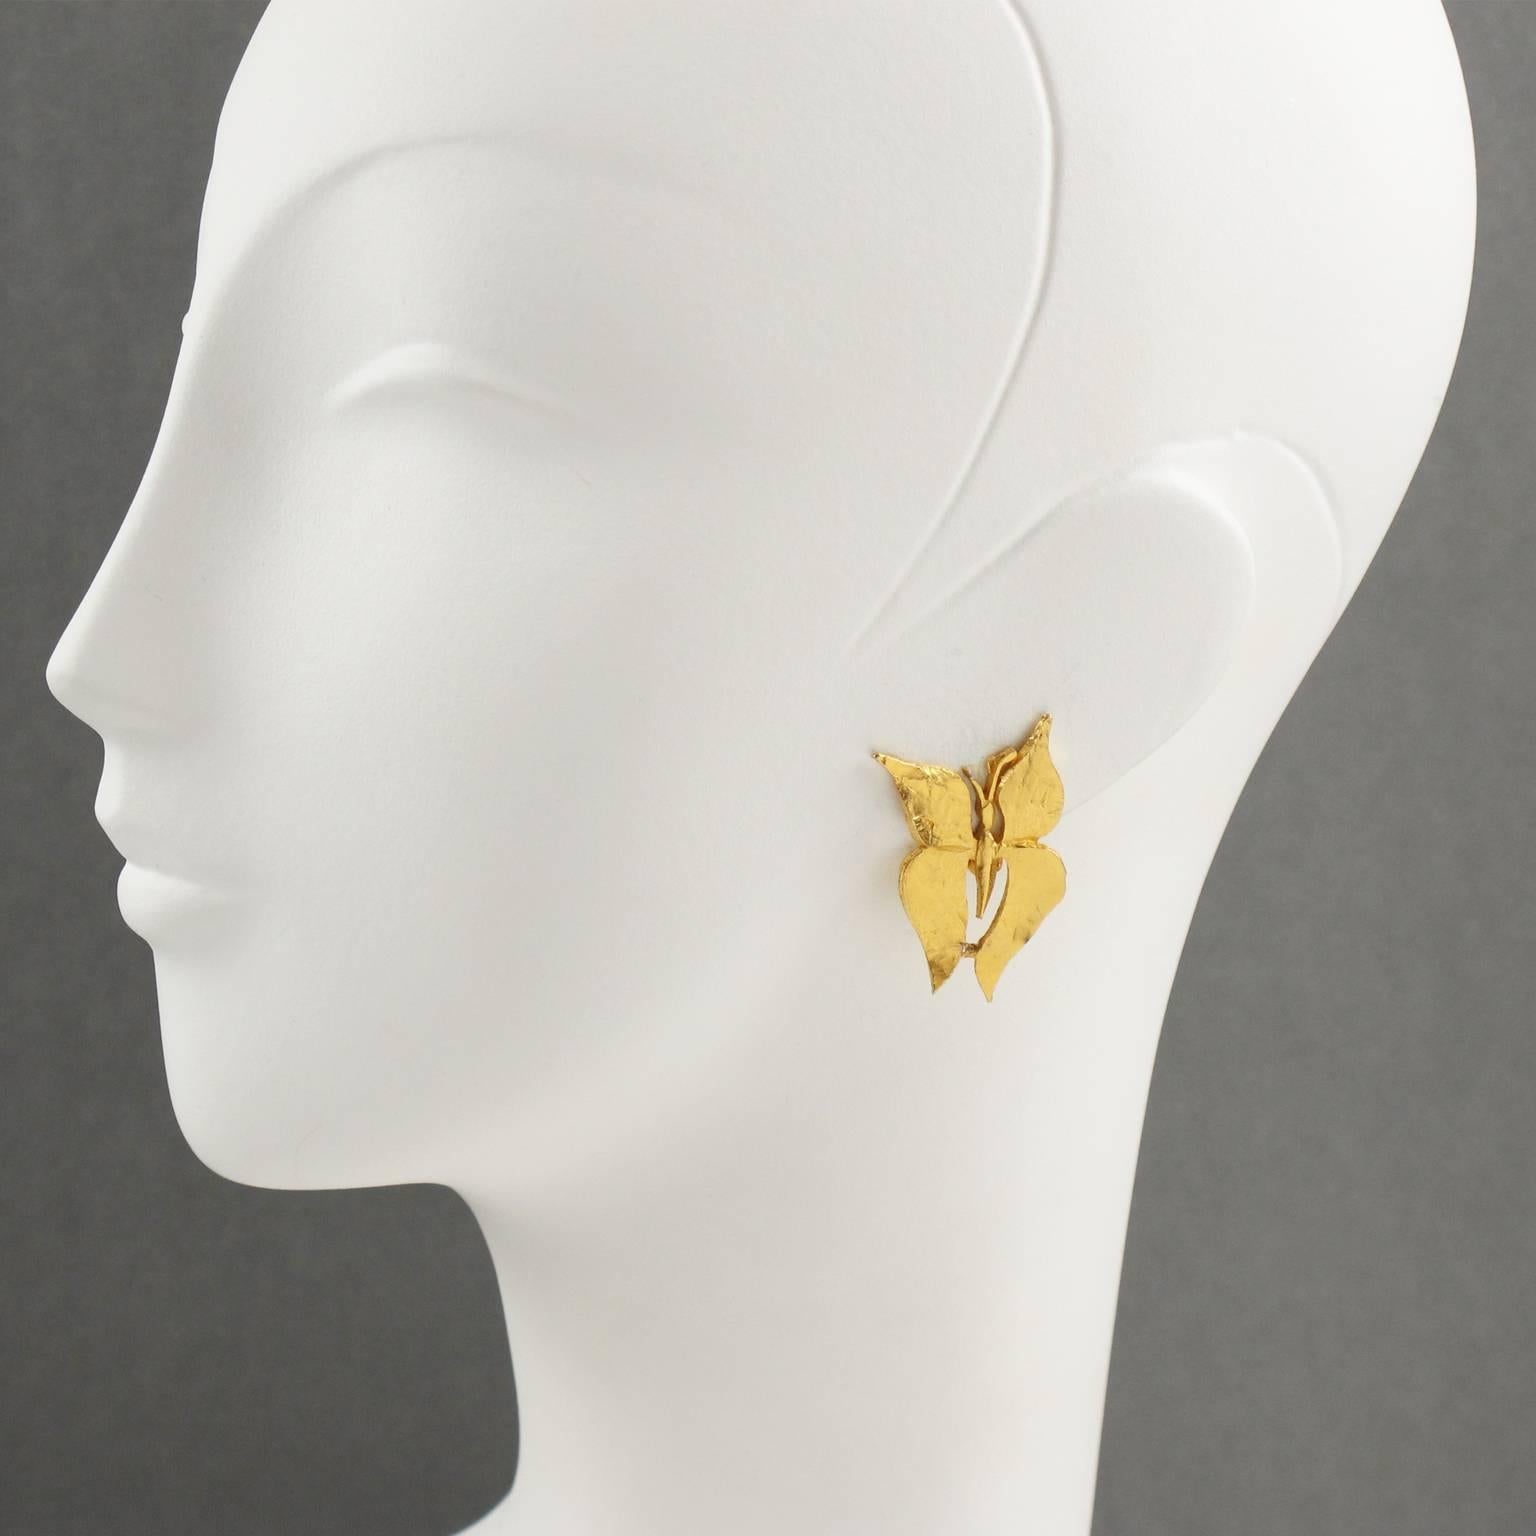 Elegant 1980s EDOUARD RAMBAUD Paris clip on Earrings. Lovely dimensional carved butterfly shape in gilt metal all textured with hand-made feel and brushed finish aspect. Signed at the back by this well-known French Designer. Excellent vintage